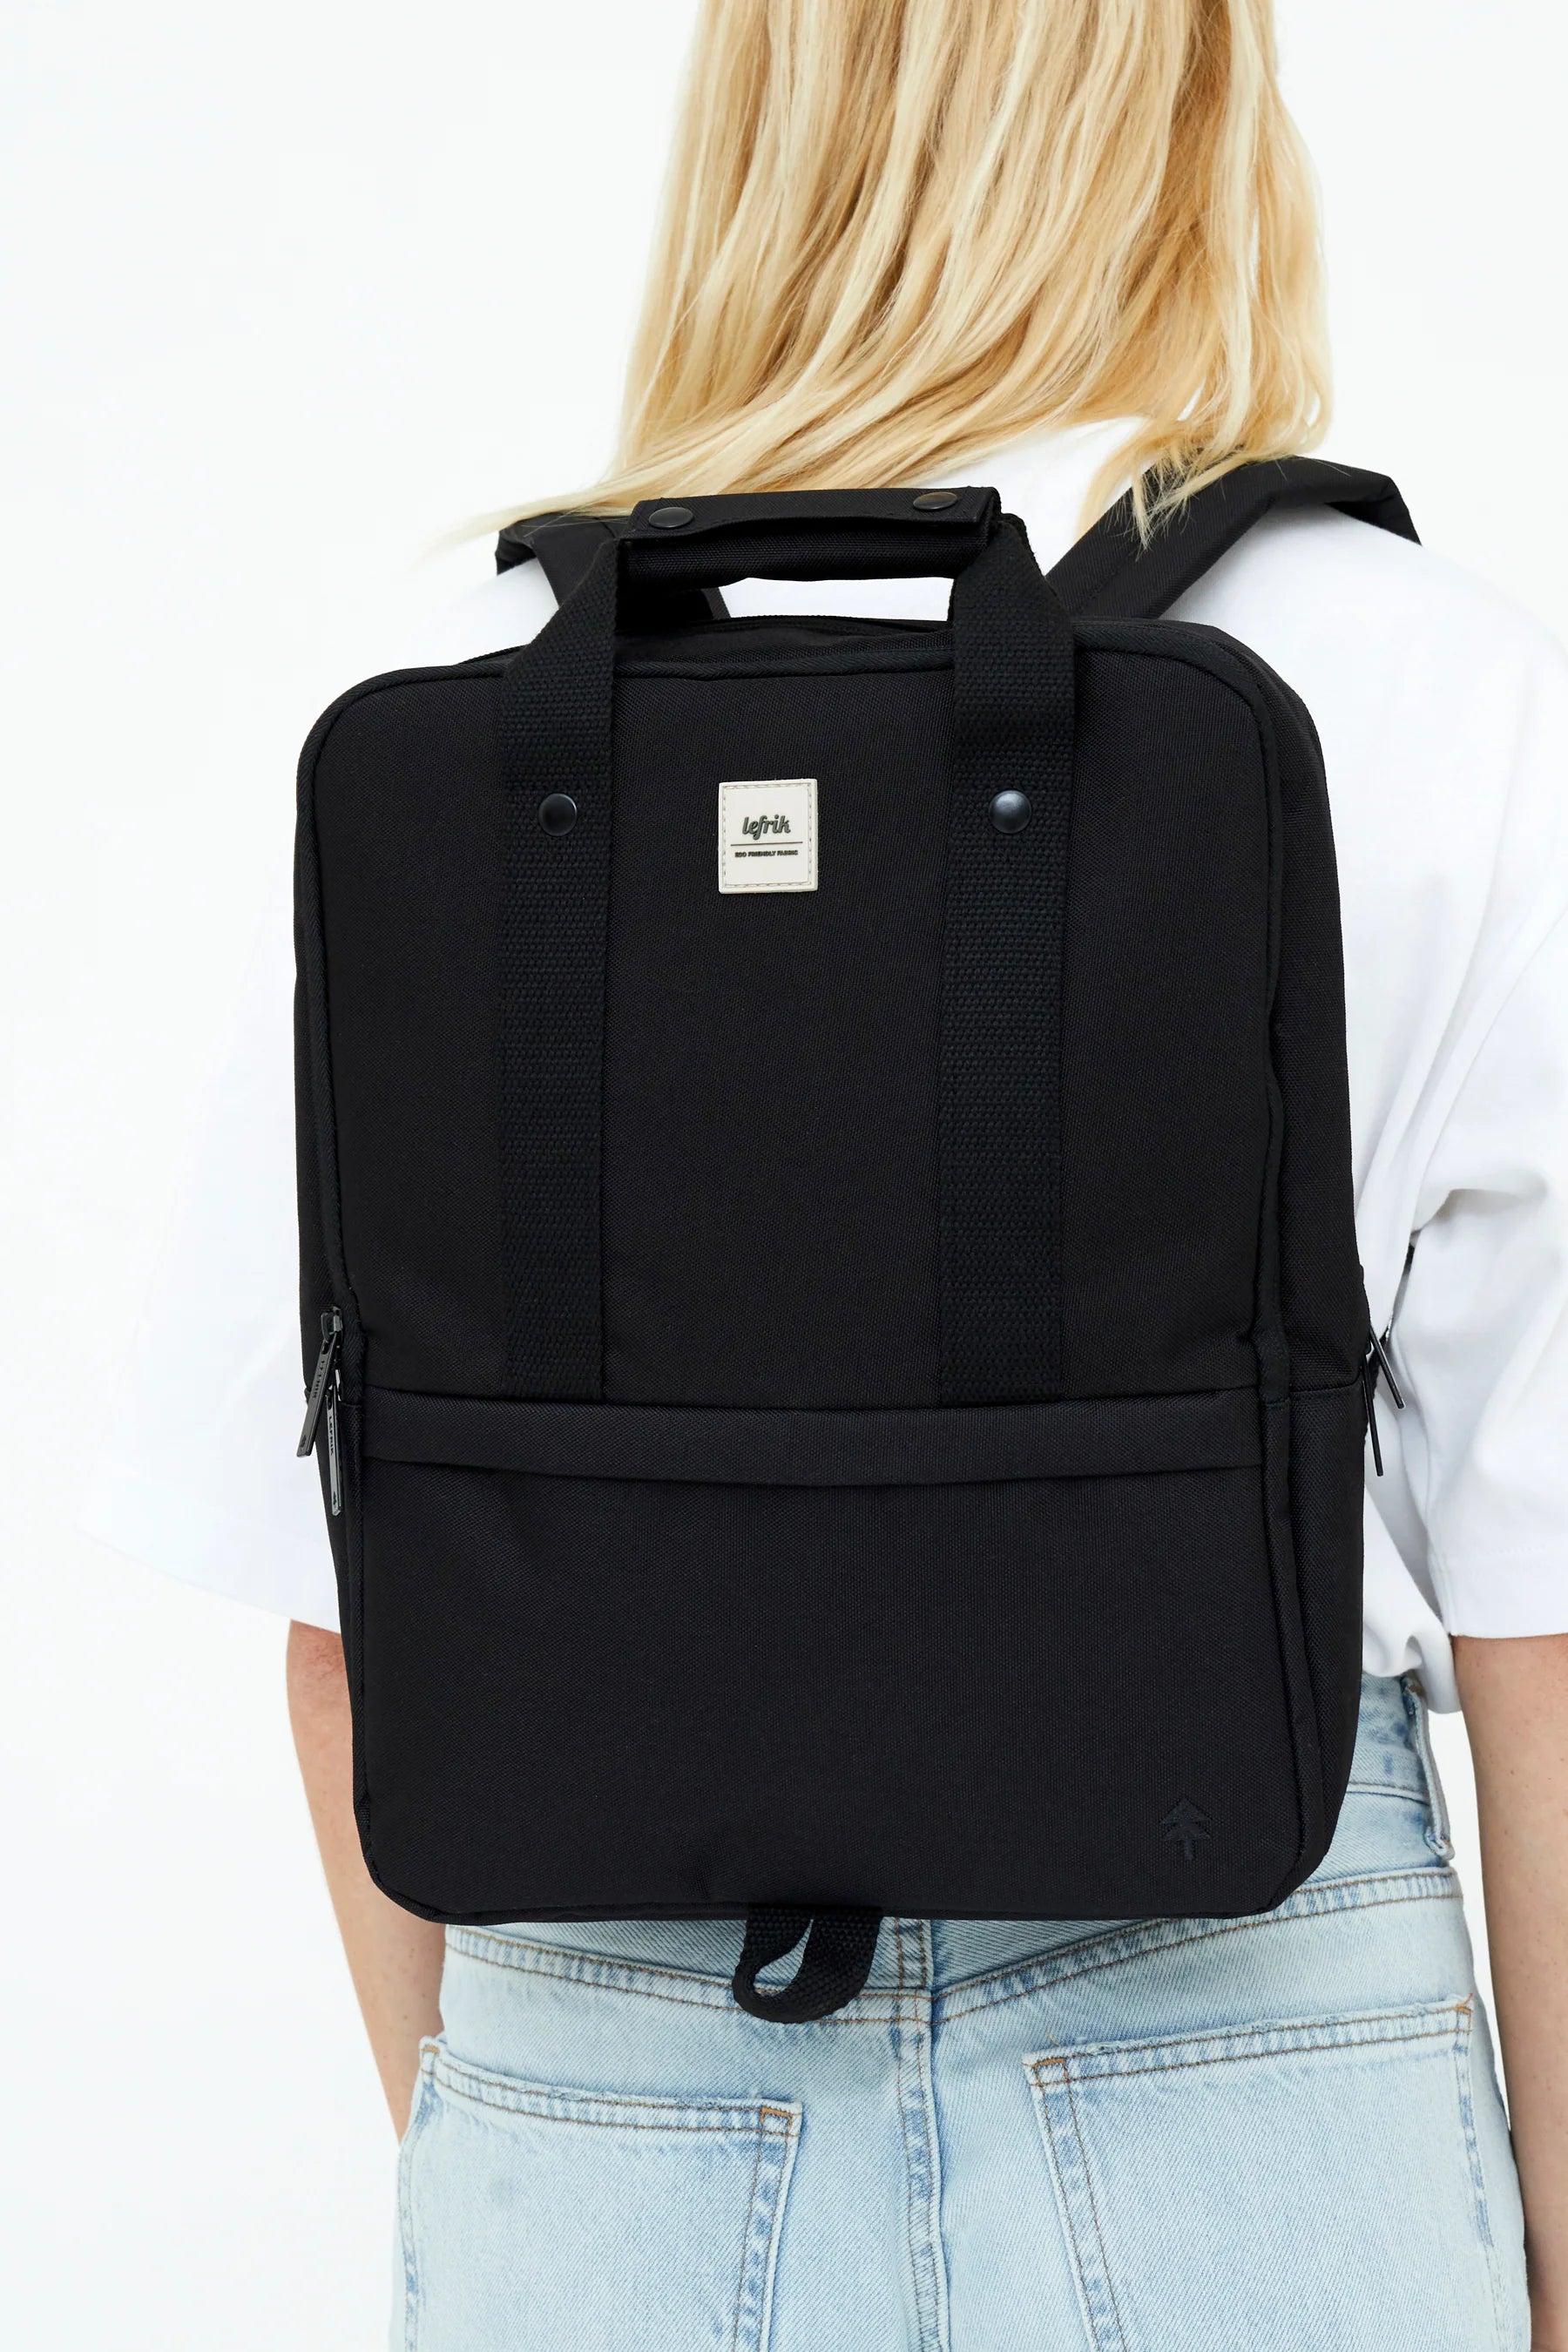 DAILY Smart 13" Backpack - Black